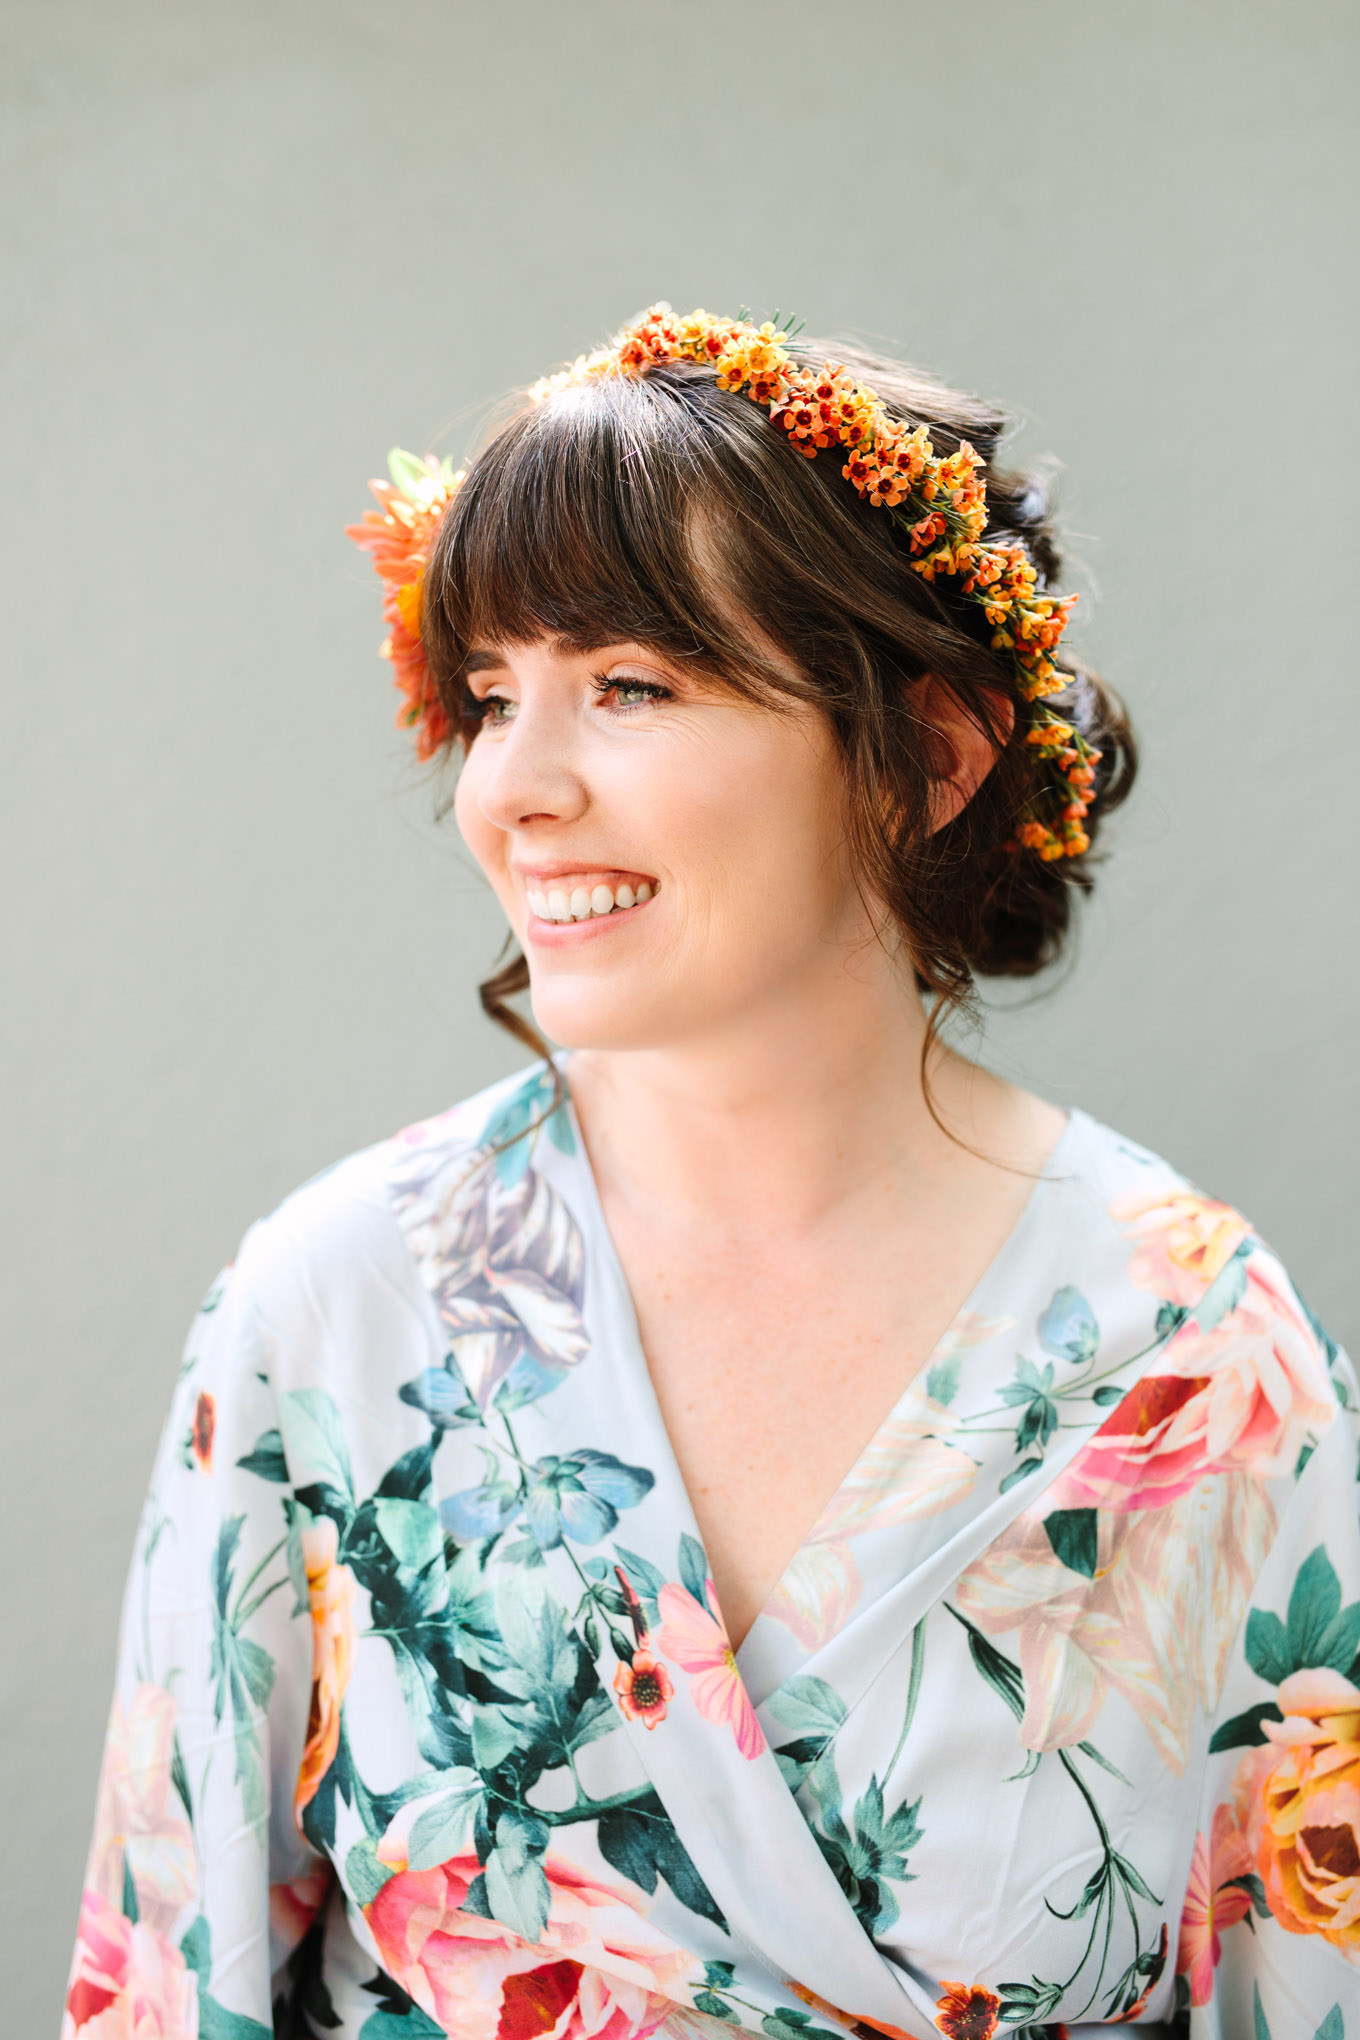 Bride in flowing, floral robe | Vibrant backyard micro wedding featured on Green Wedding Shoes | Colorful LA wedding photography | #losangeleswedding #backyardwedding #microwedding #laweddingphotographer Source: Mary Costa Photography | Los Angeles